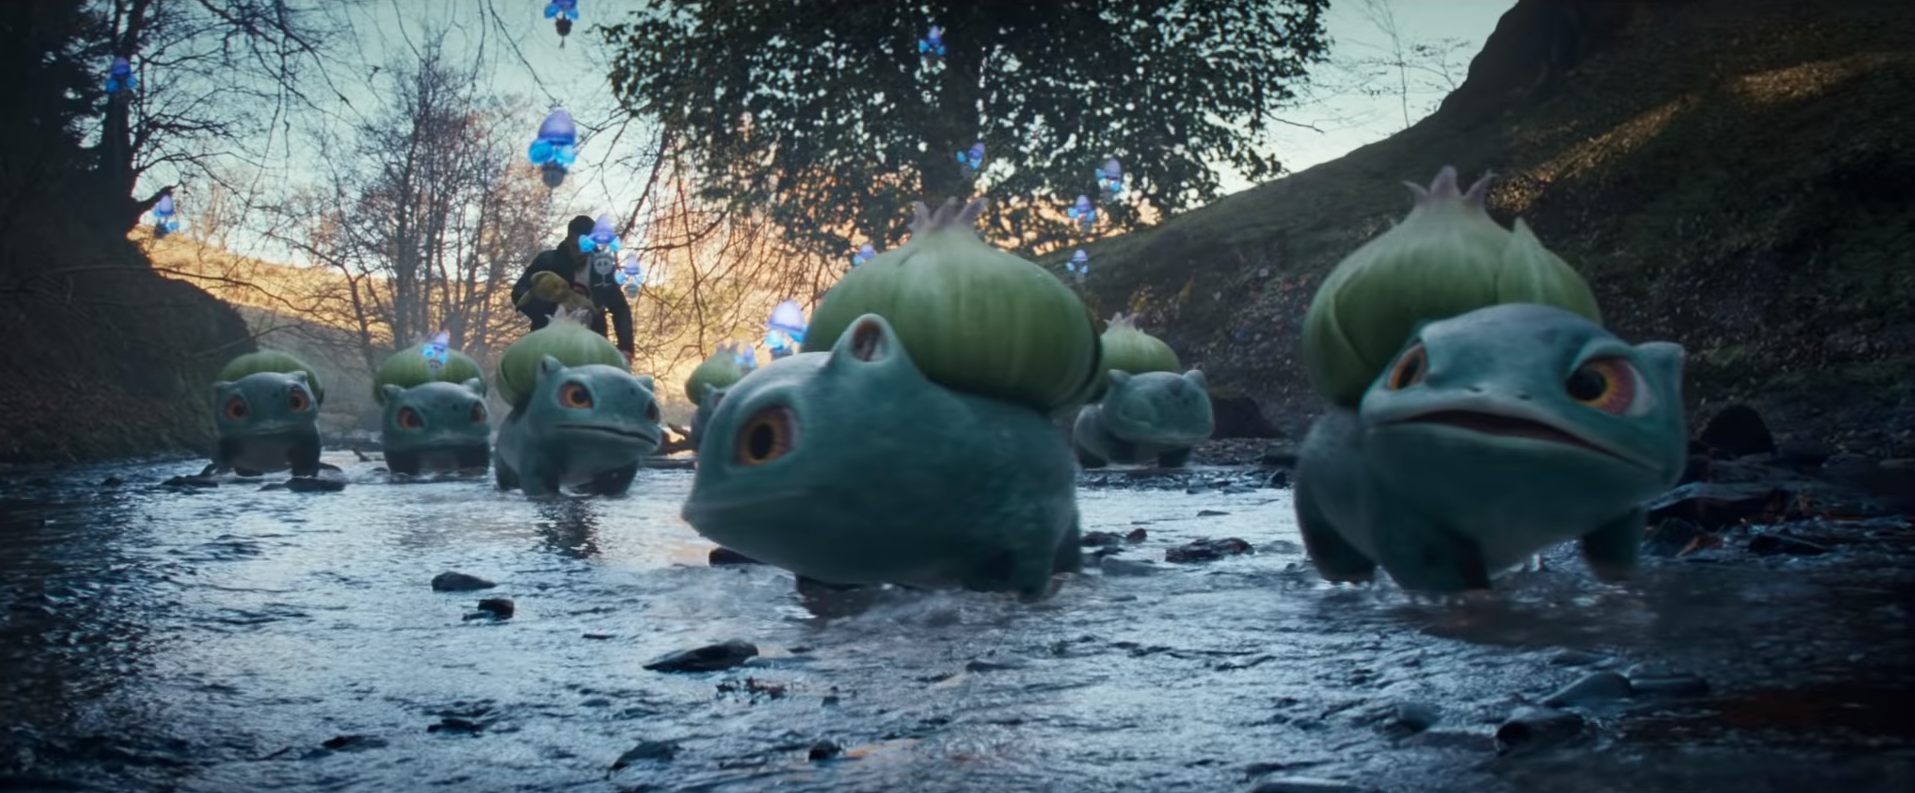 Which Pokemon Appear in Detective Pikachu Movie?